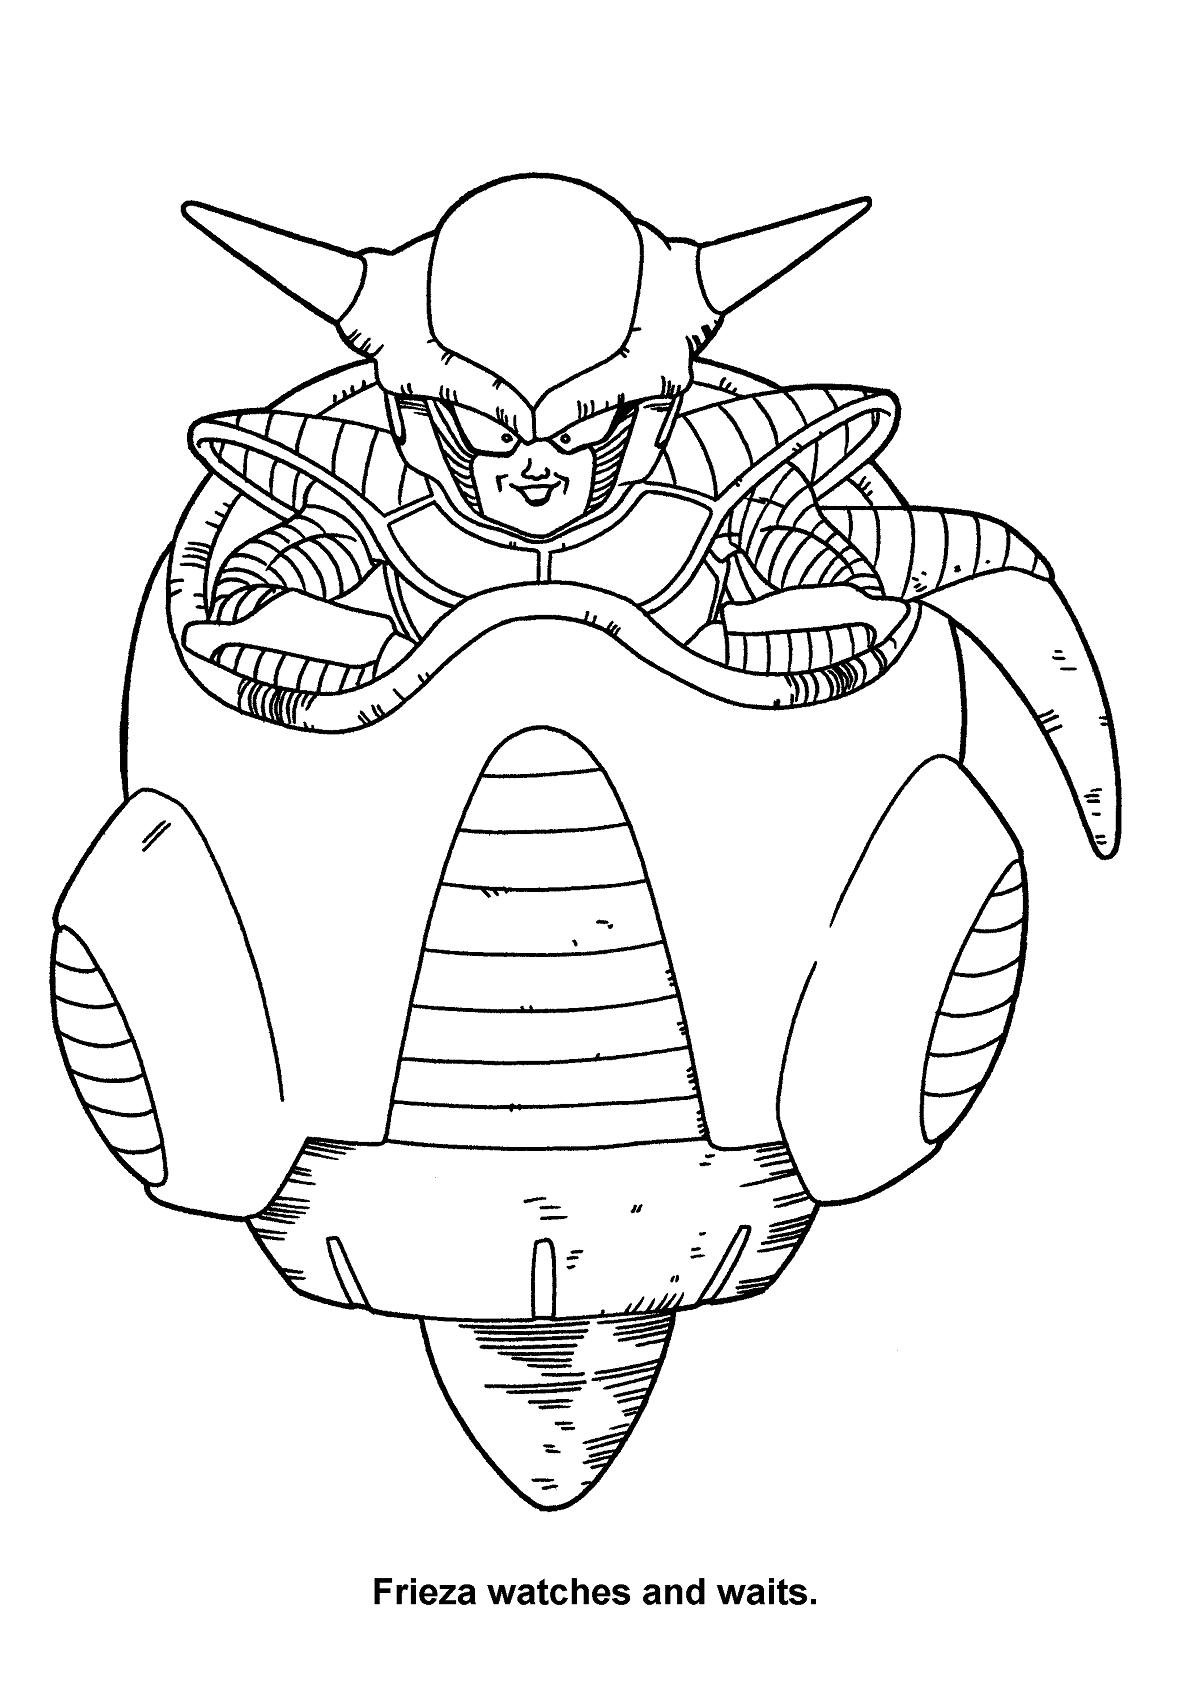 Frieza from Dragon Ball Z Coloring Pages - Dragon Ball Z Coloring Pages - Coloring  Pages For Kids And Adults